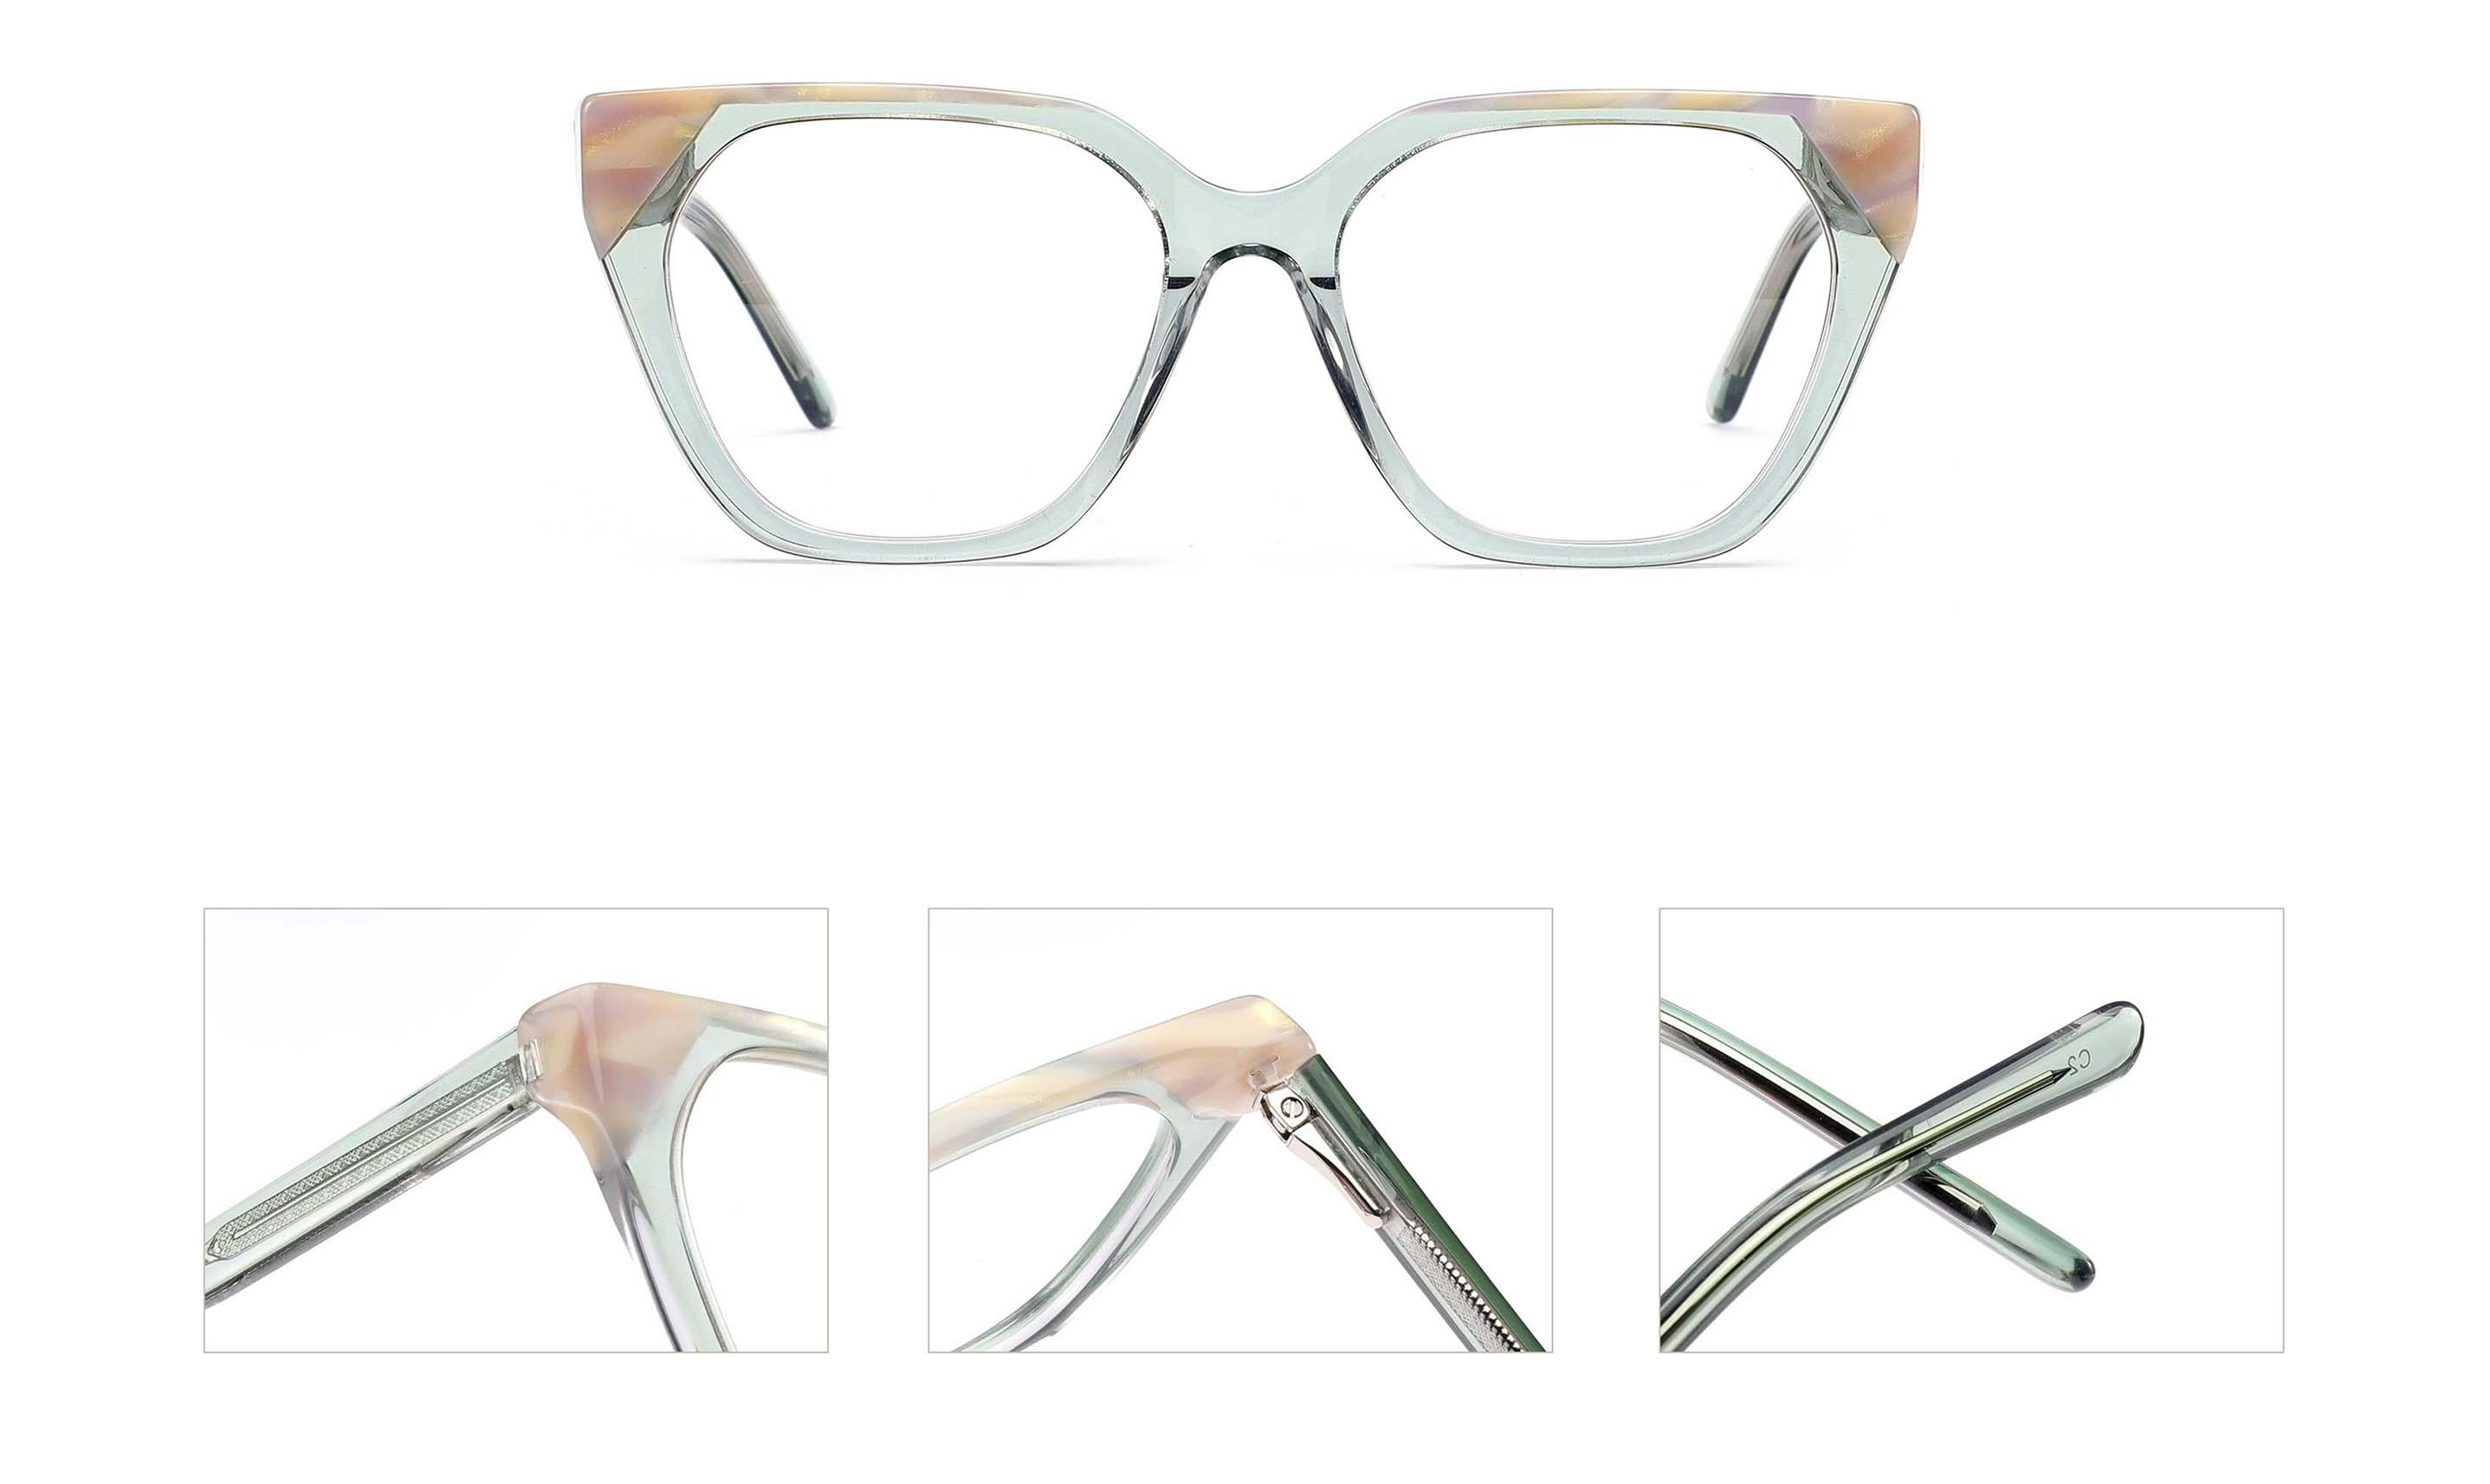 Introducing Our Latest LAMINATION ACETATE OPTICAL FRAMES